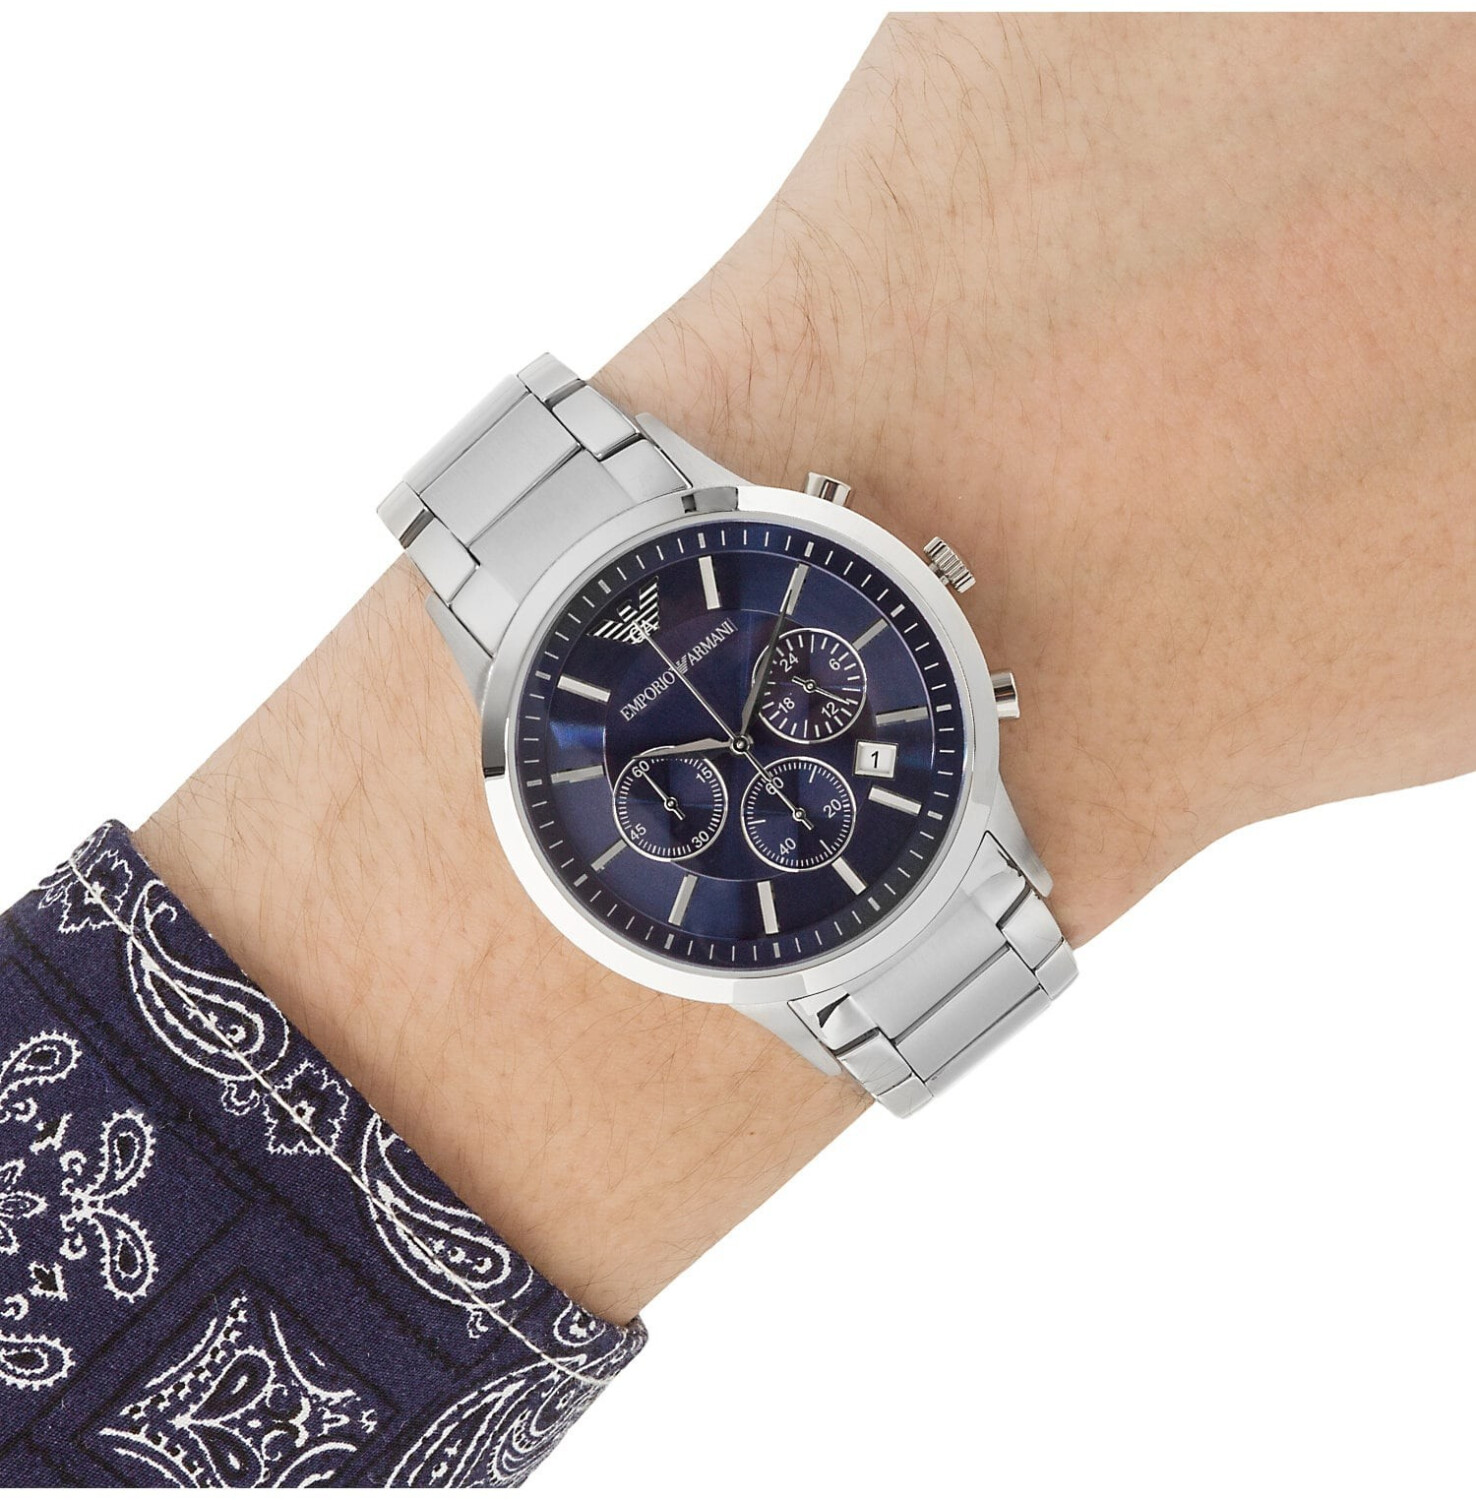 Buy Emporio Armani Renato Chronograph on (Today) AR2448 £67.53 from – Deals Best